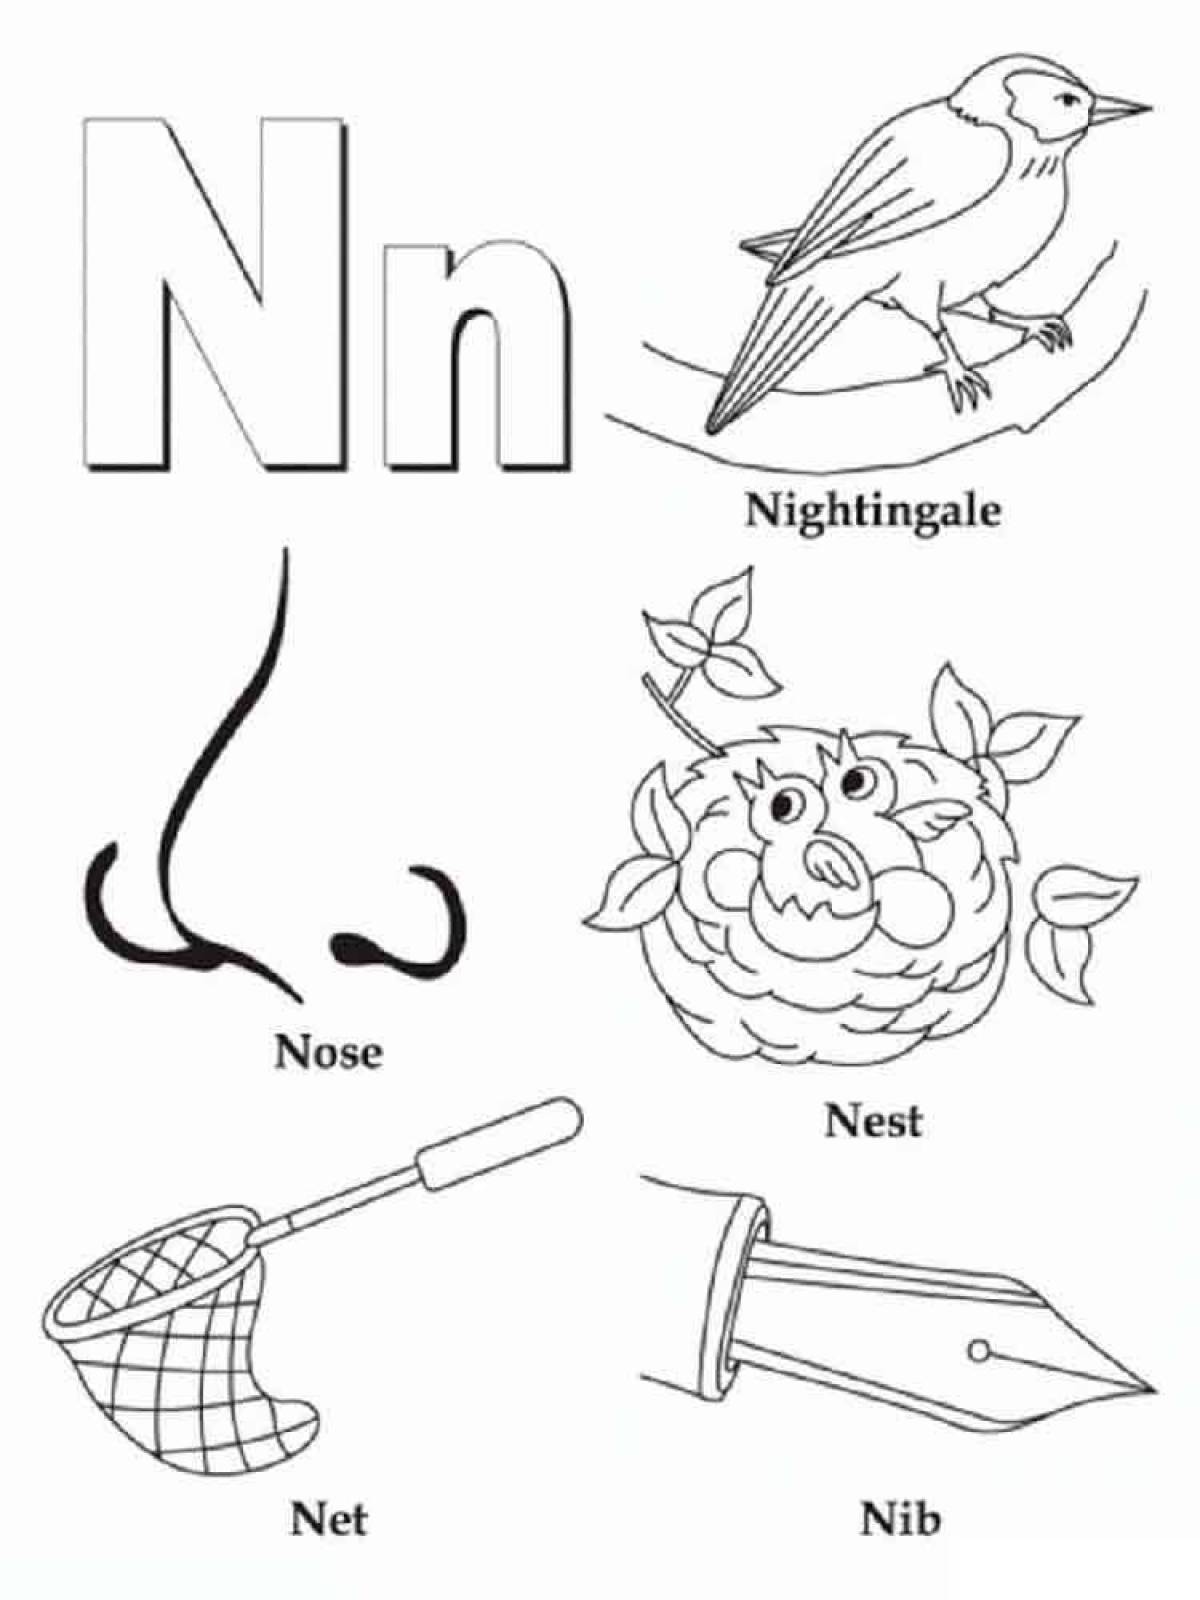 Colorful coloring page with alphabet letters for 2nd grade kids